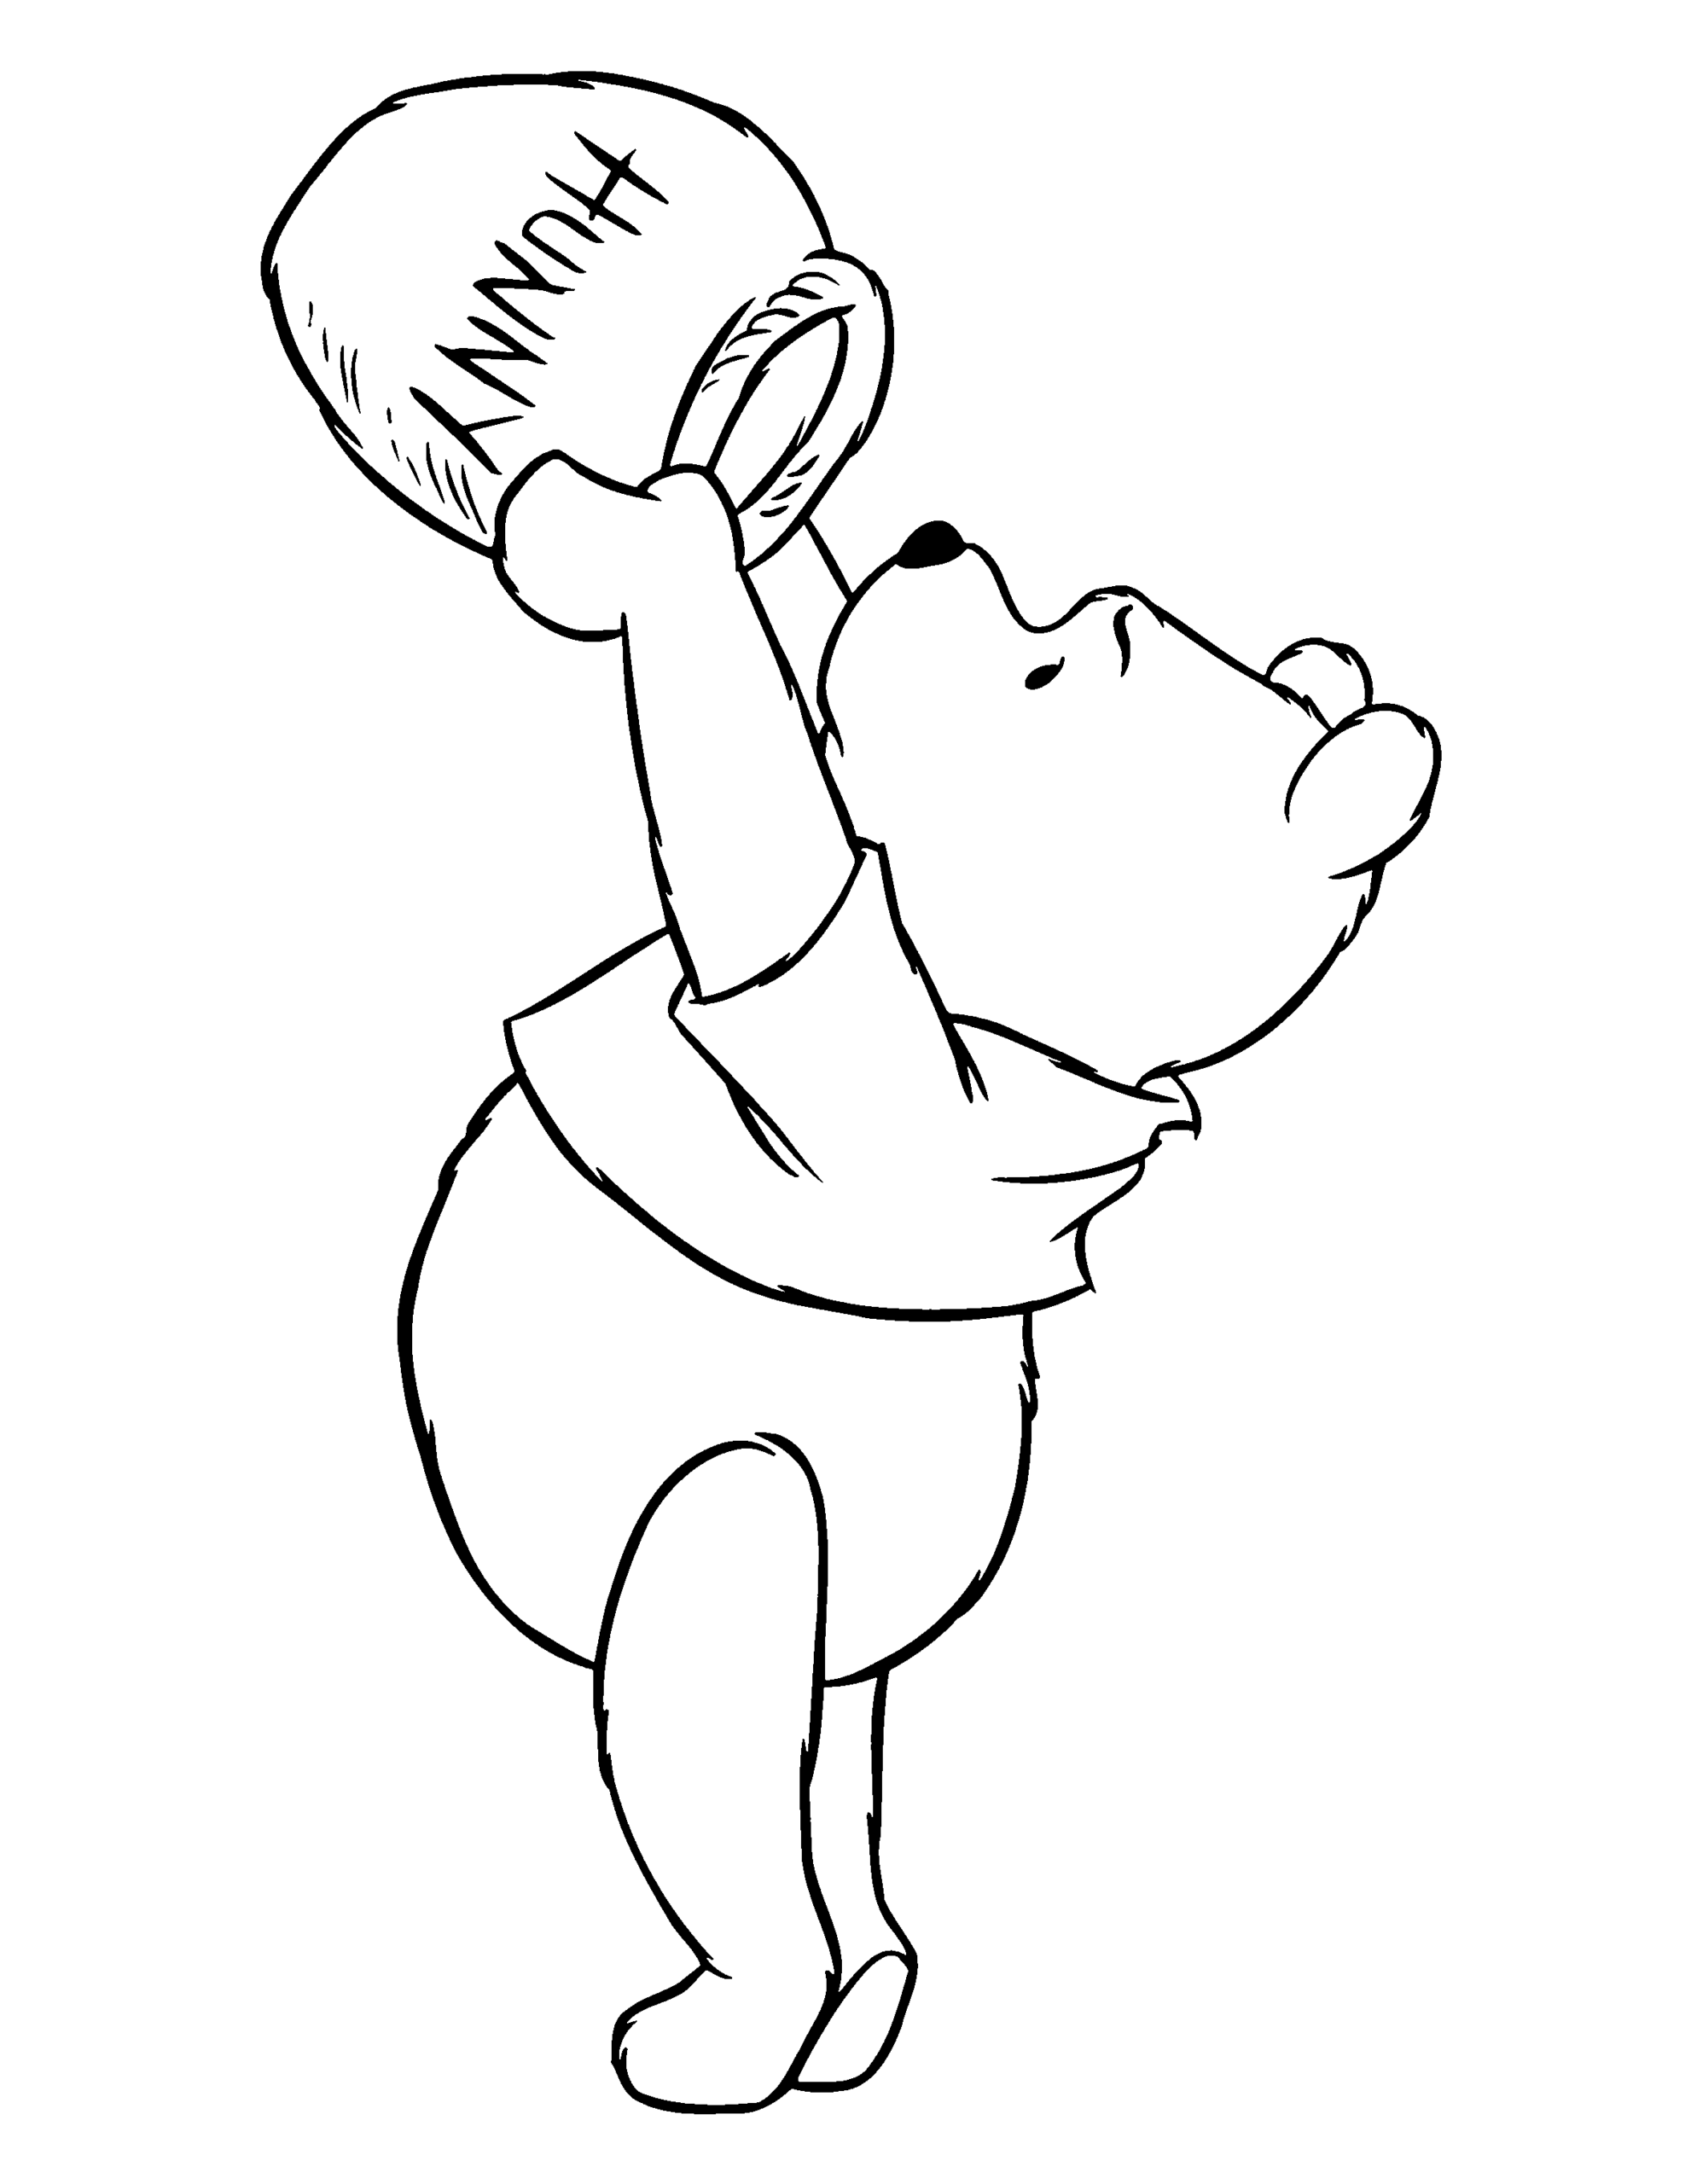 Winnie the Pooh Coloring Pages Cartoons Winnie The Pooh To Print Printable 2020 7229 Coloring4free